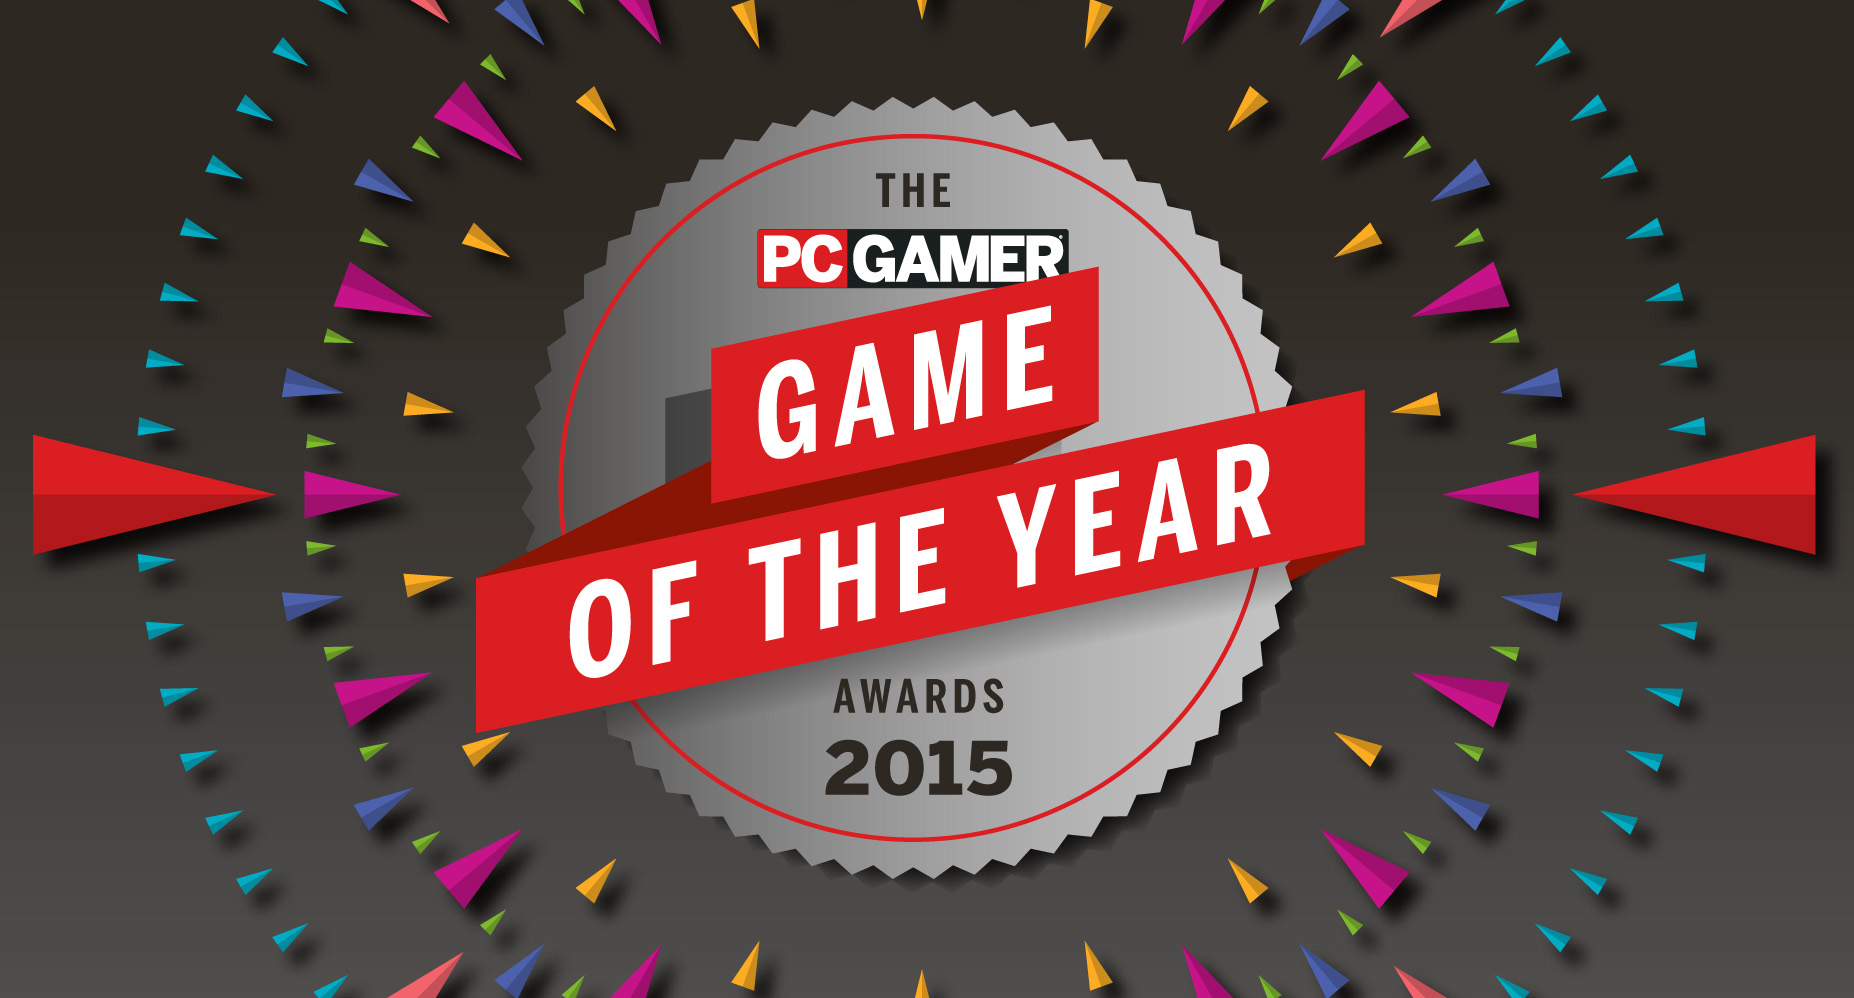 Here Are the 2015 Game Award Nominees